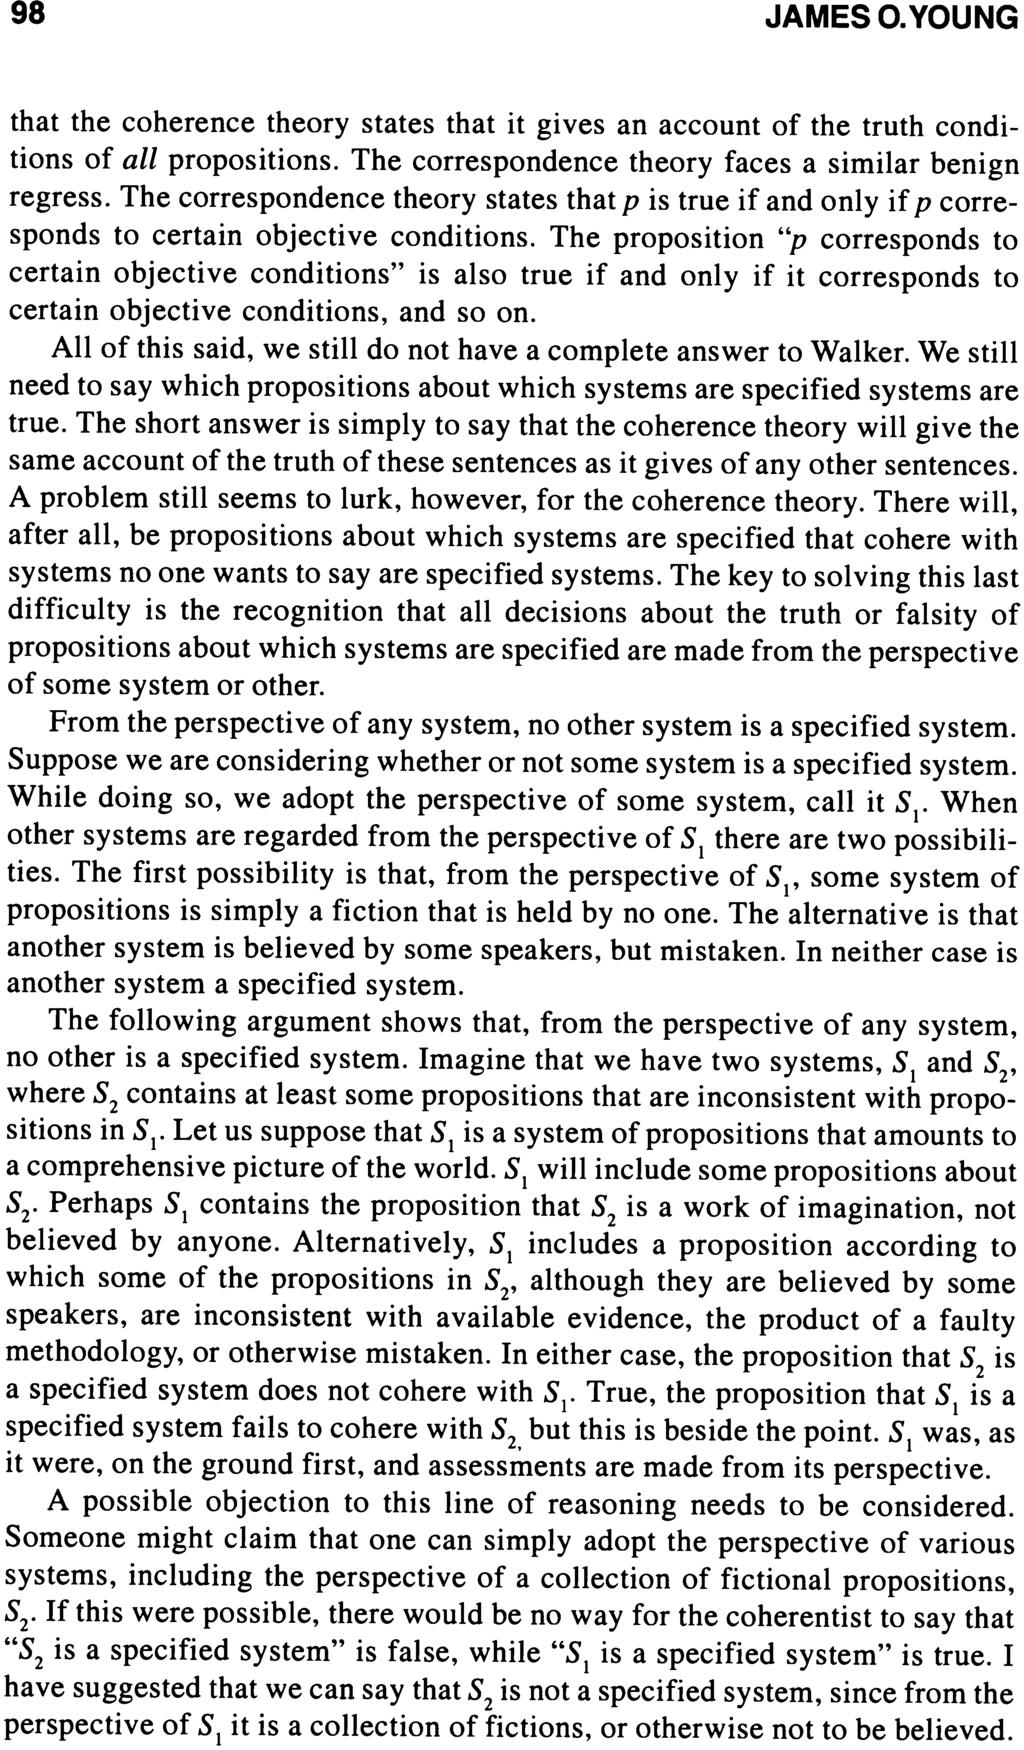 98 JAMES O. YOUNG that the coherence theory states that it gives an account of the truth conditions of all propositions. The correspondence theory faces a similar benign regress.